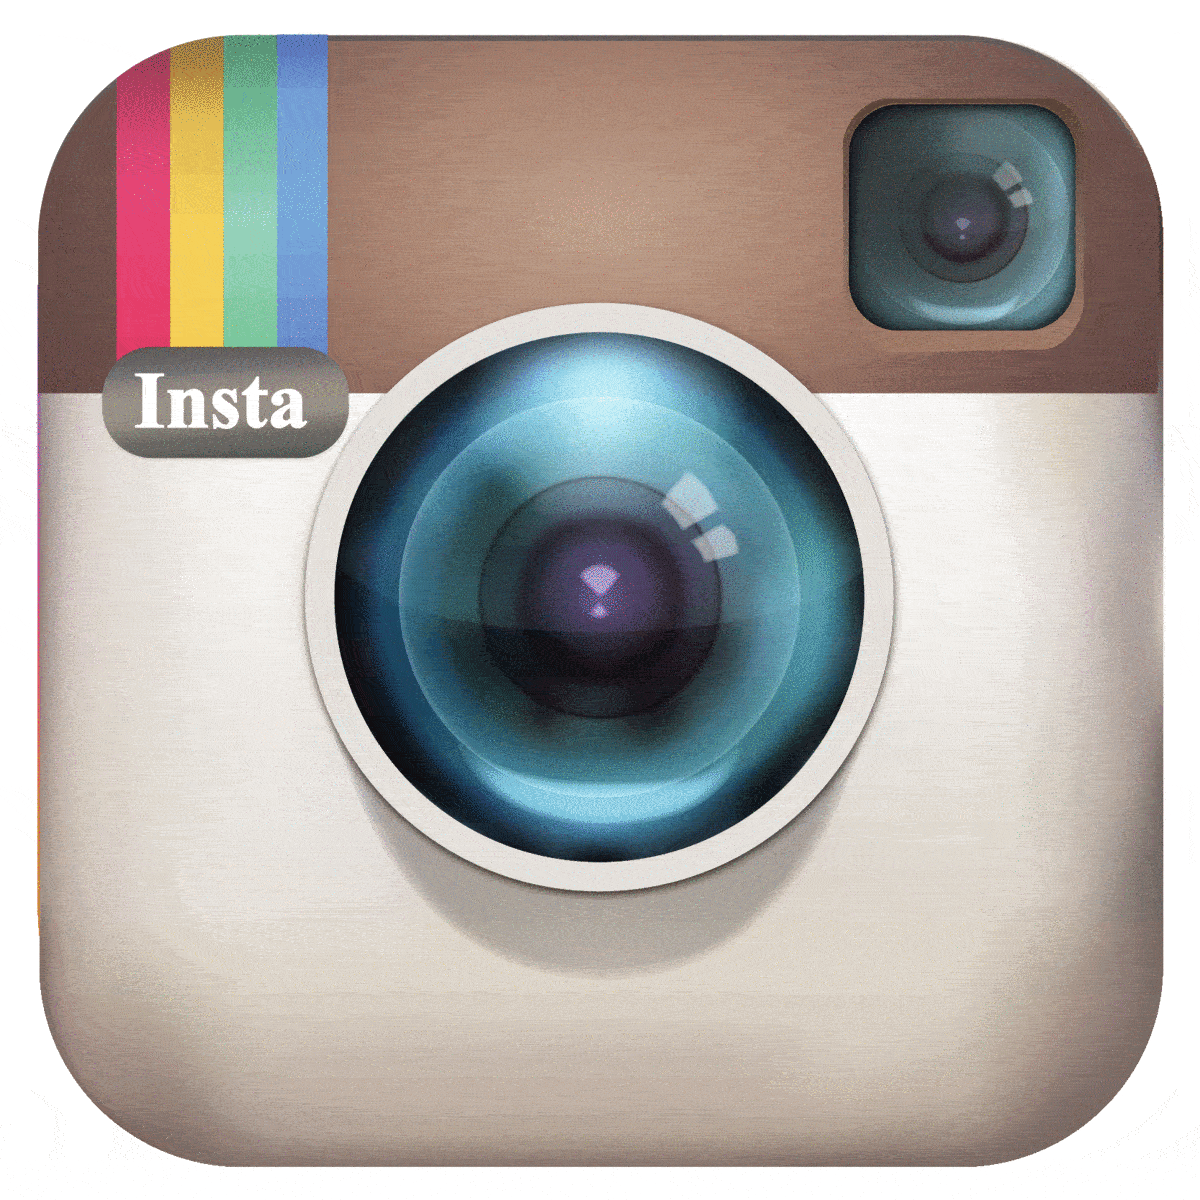 How Instagram Could Have Beat Facebook